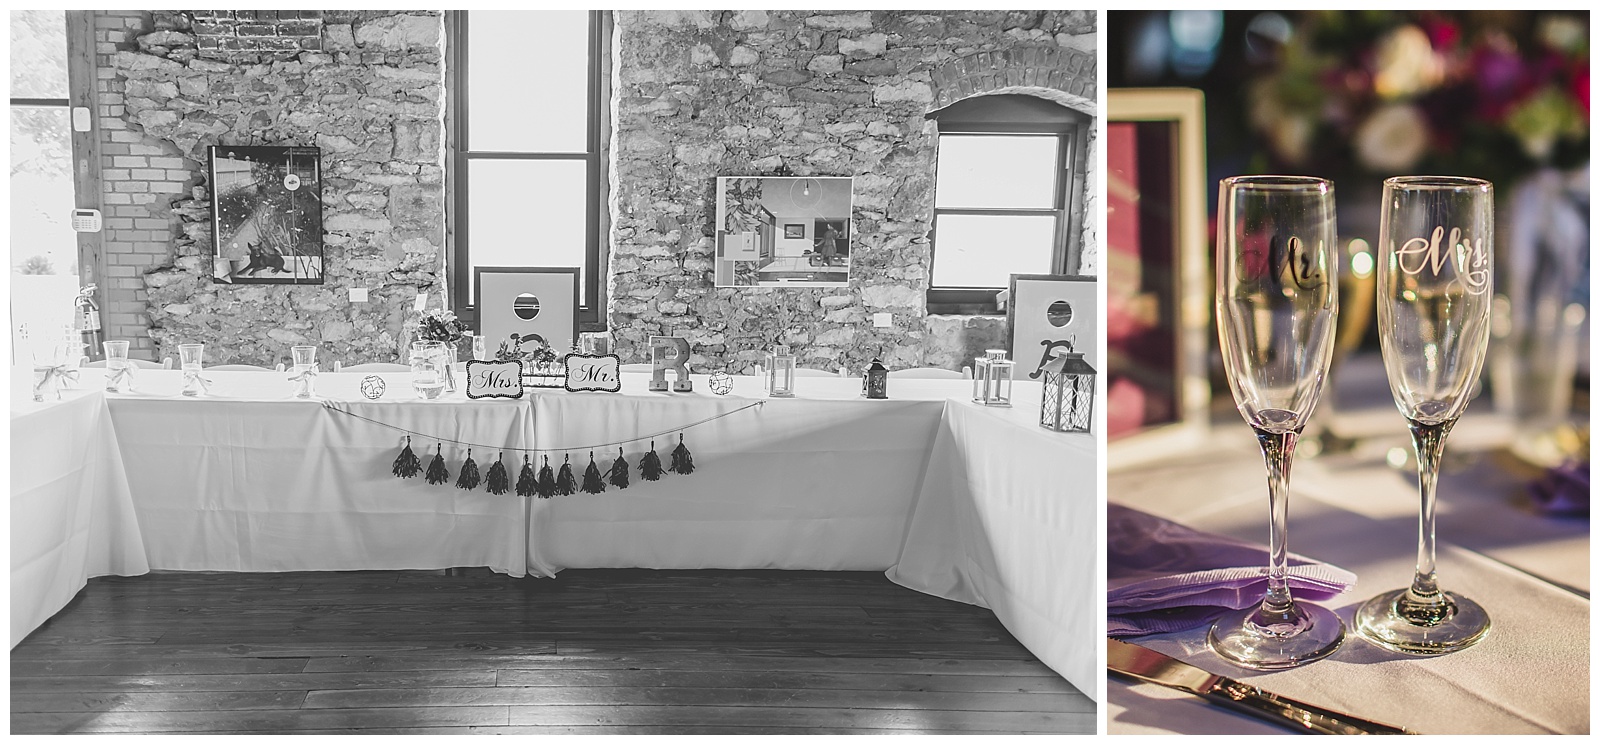 Wedding photography at the Cider Gallery in Lawrence, Kansas.